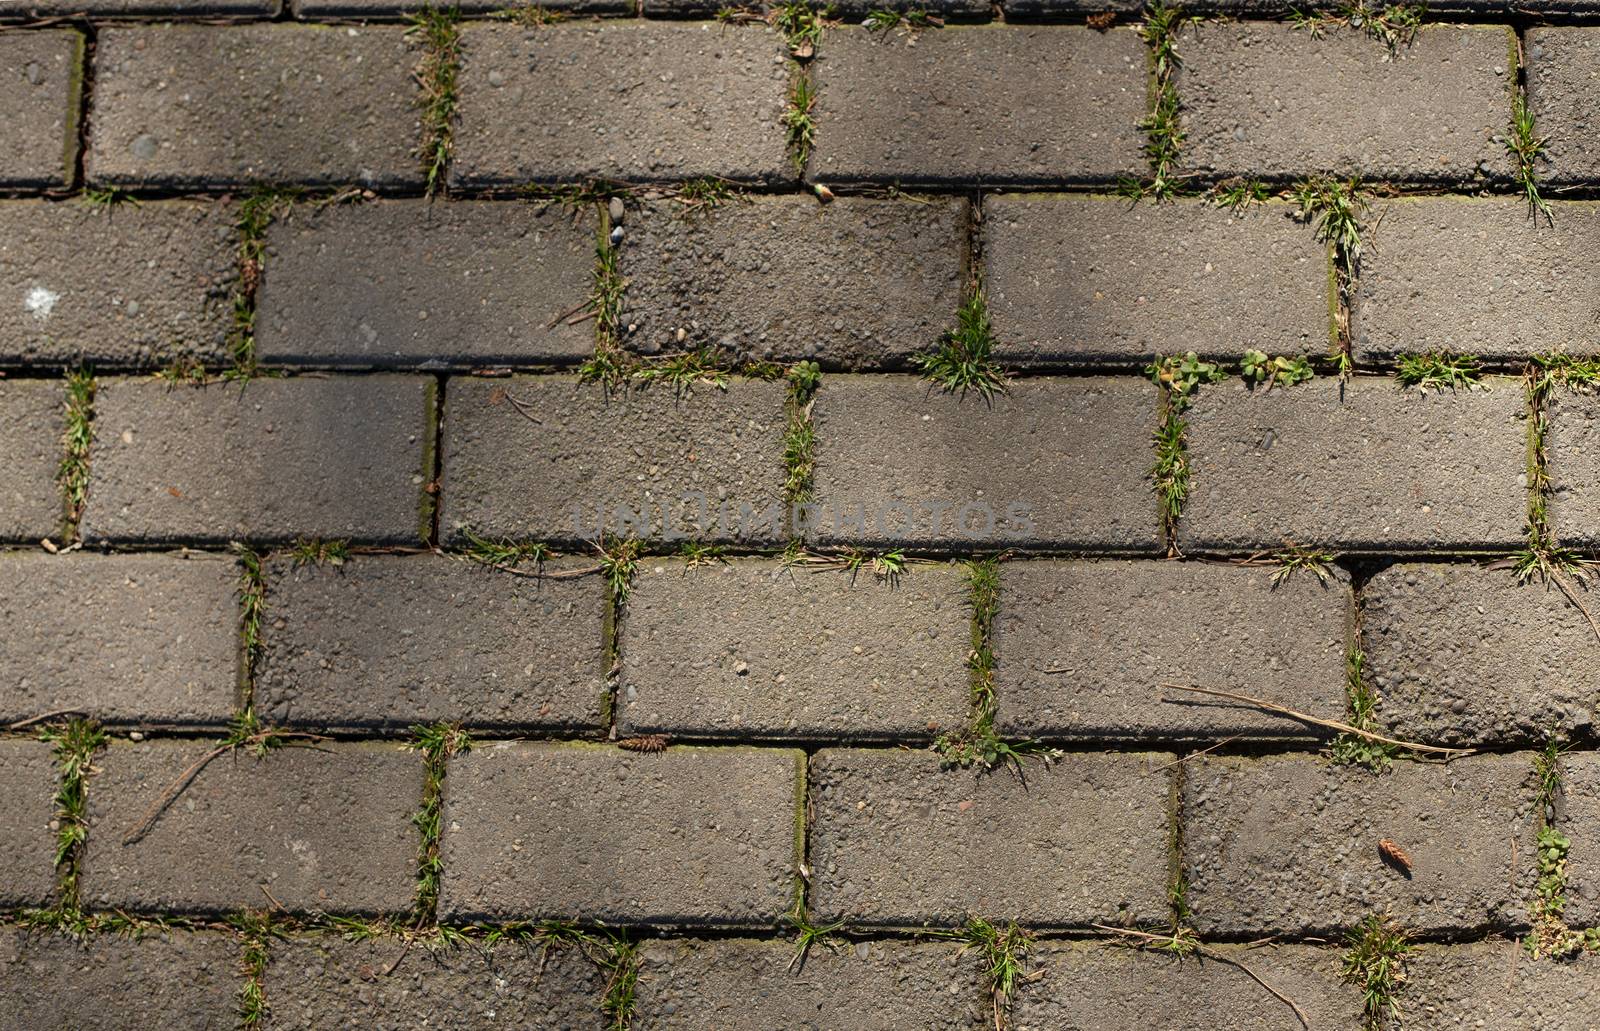 Paving slab texture with green grass